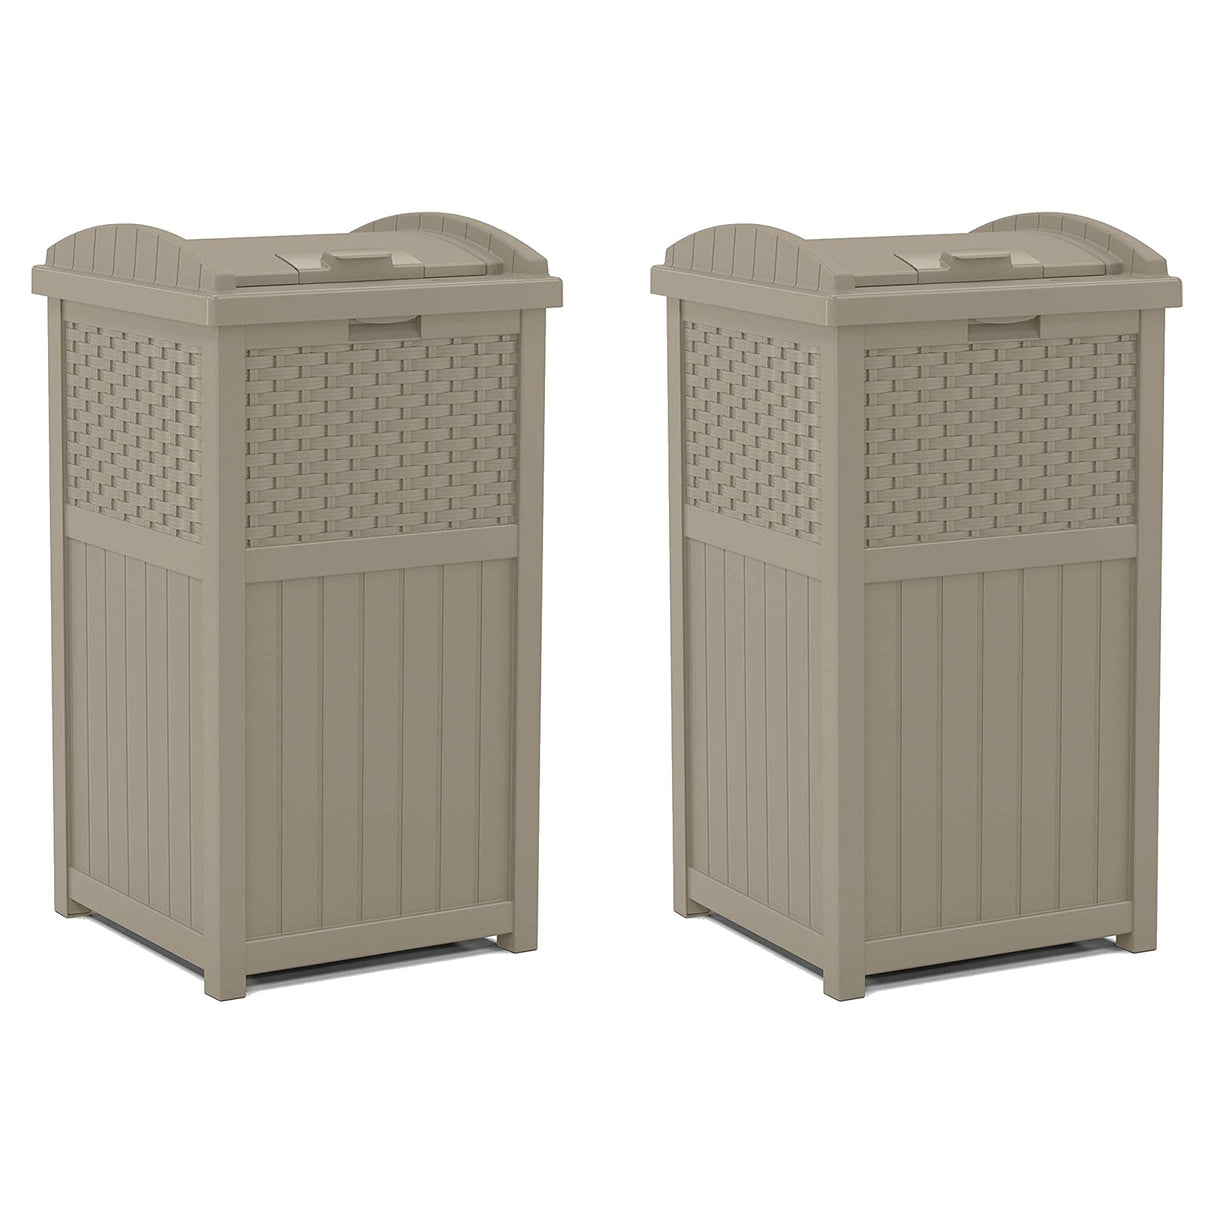 Suncast Wicker Plastic Hideaway Trash Can With Latching Lid, Dark Taupe (2 Pack)